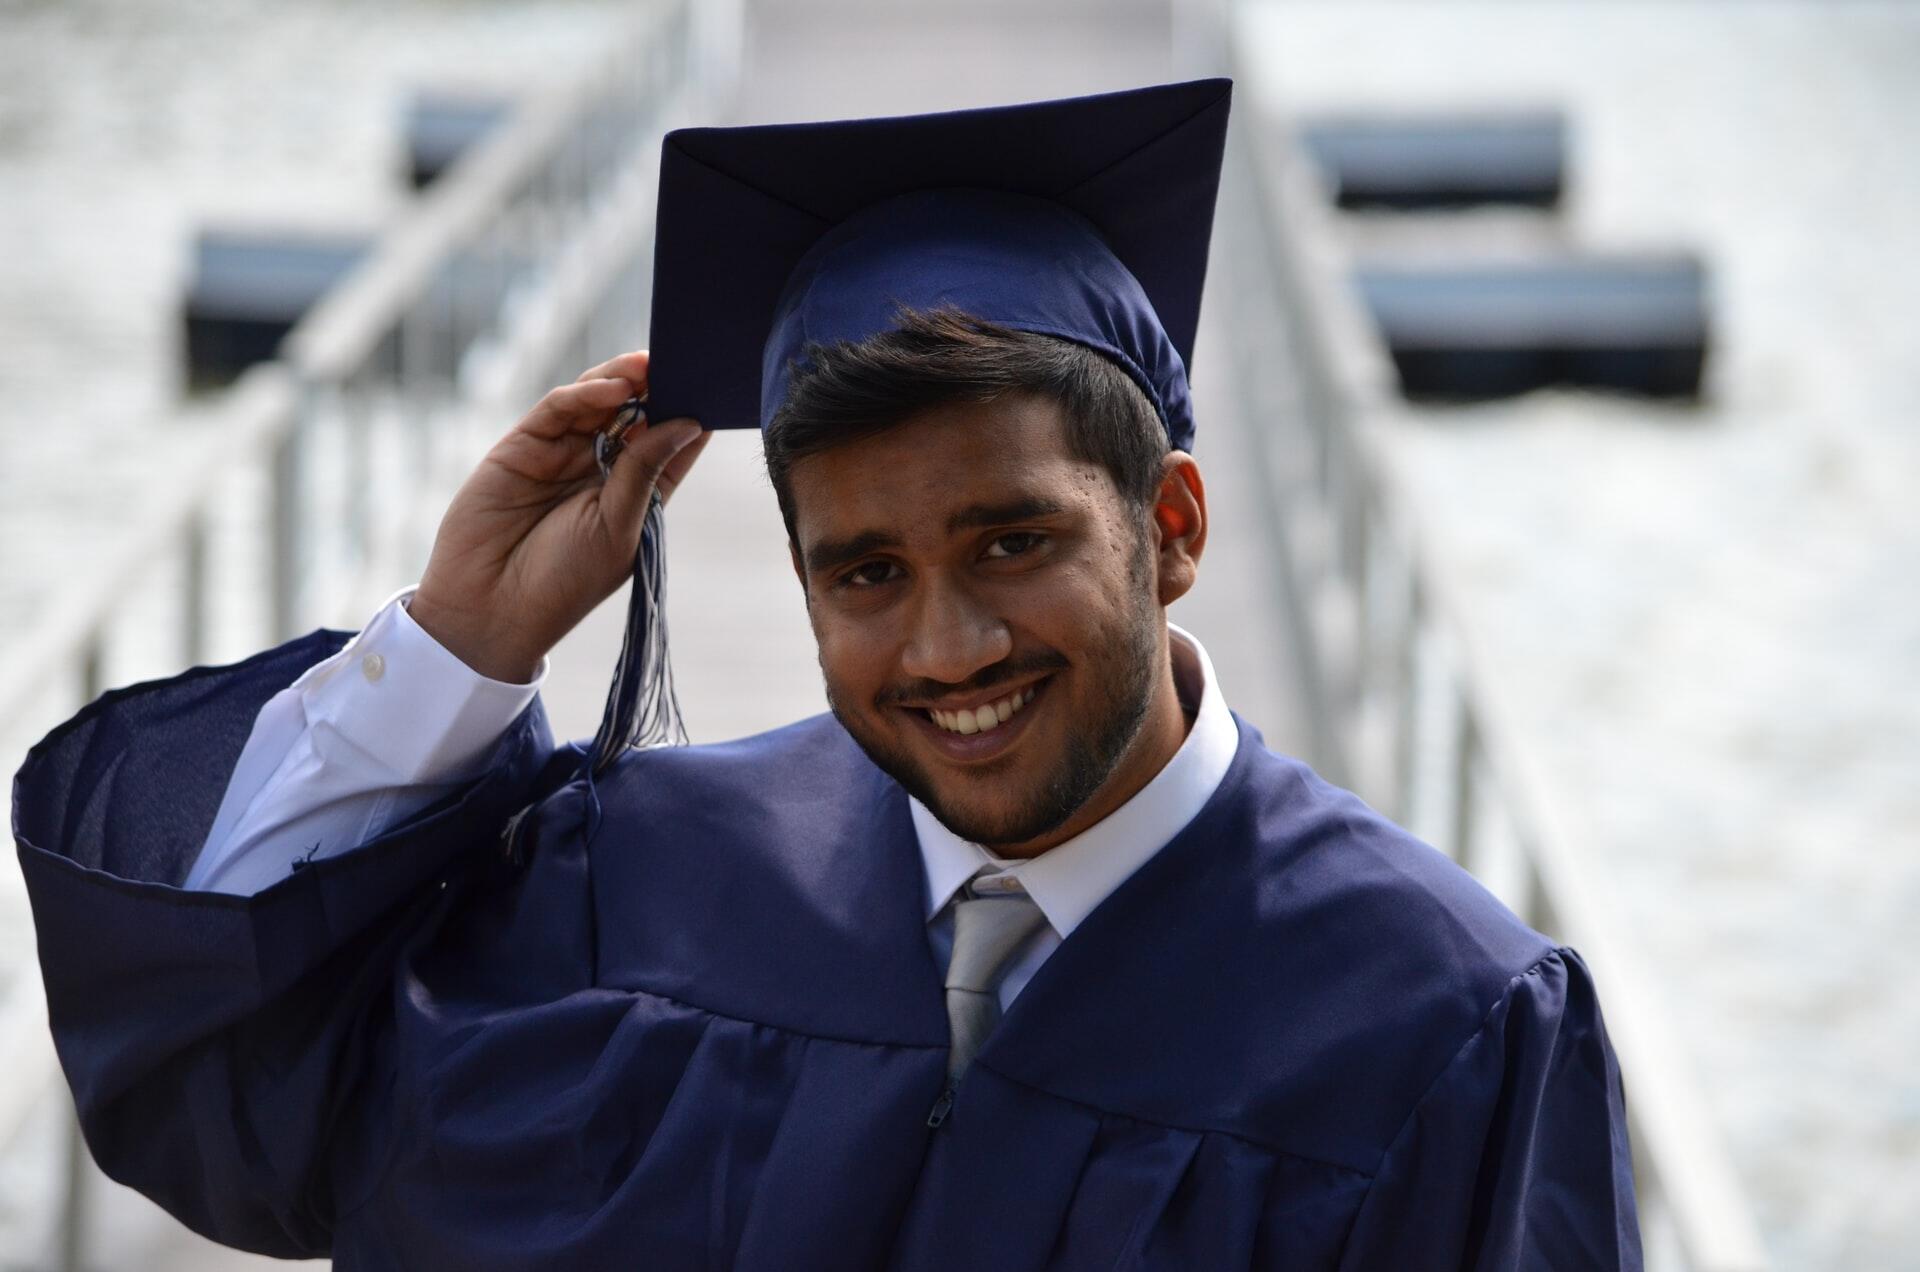 Male student in graduation cap and gown